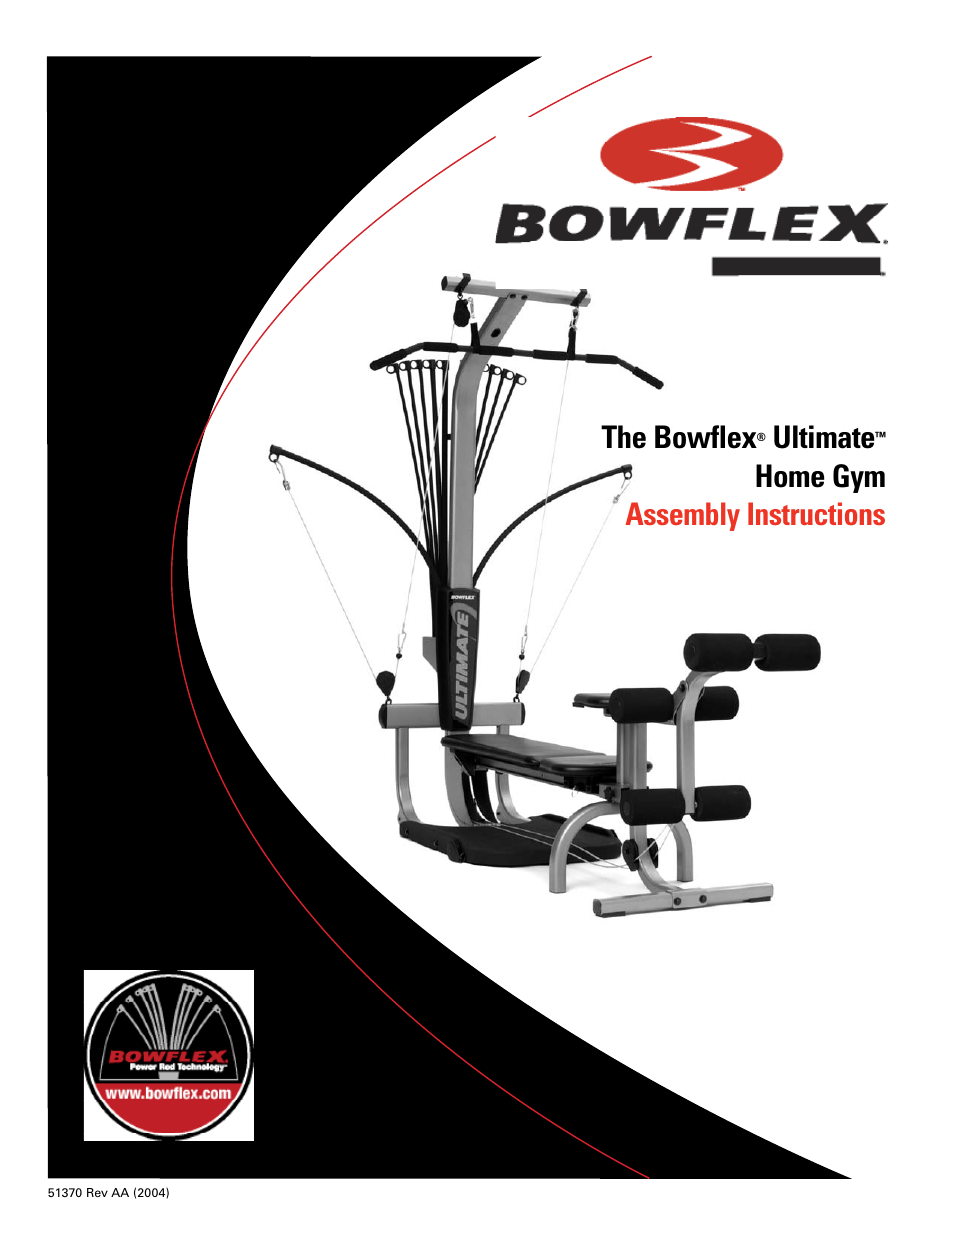 The bowflex, Ultimate, Home gym assembly instructions | Bowflex ...